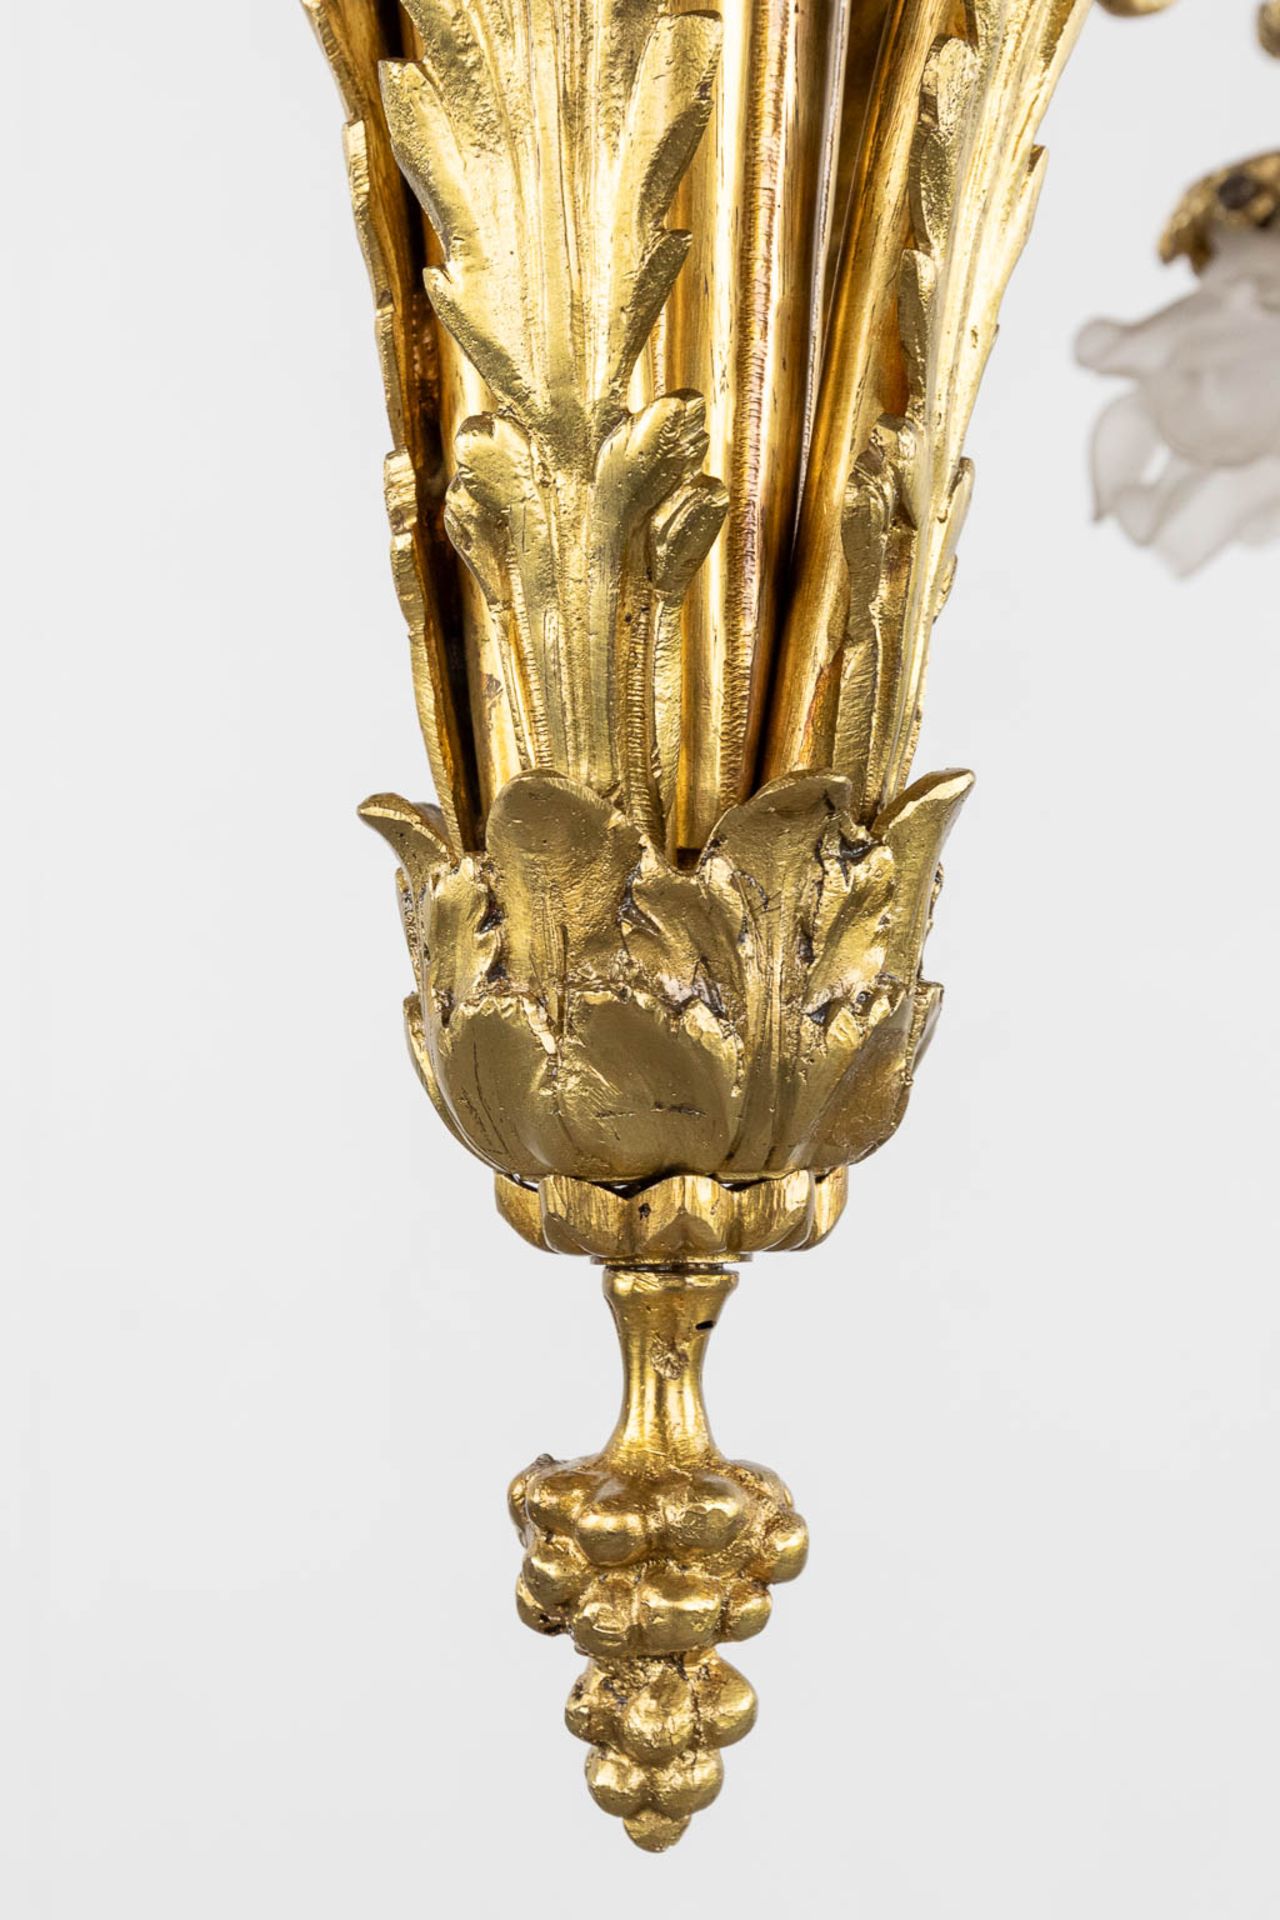 A chandelier, bronze finished with ram's heads, Louis XVI style. (H:93 x D:66 cm) - Image 10 of 13